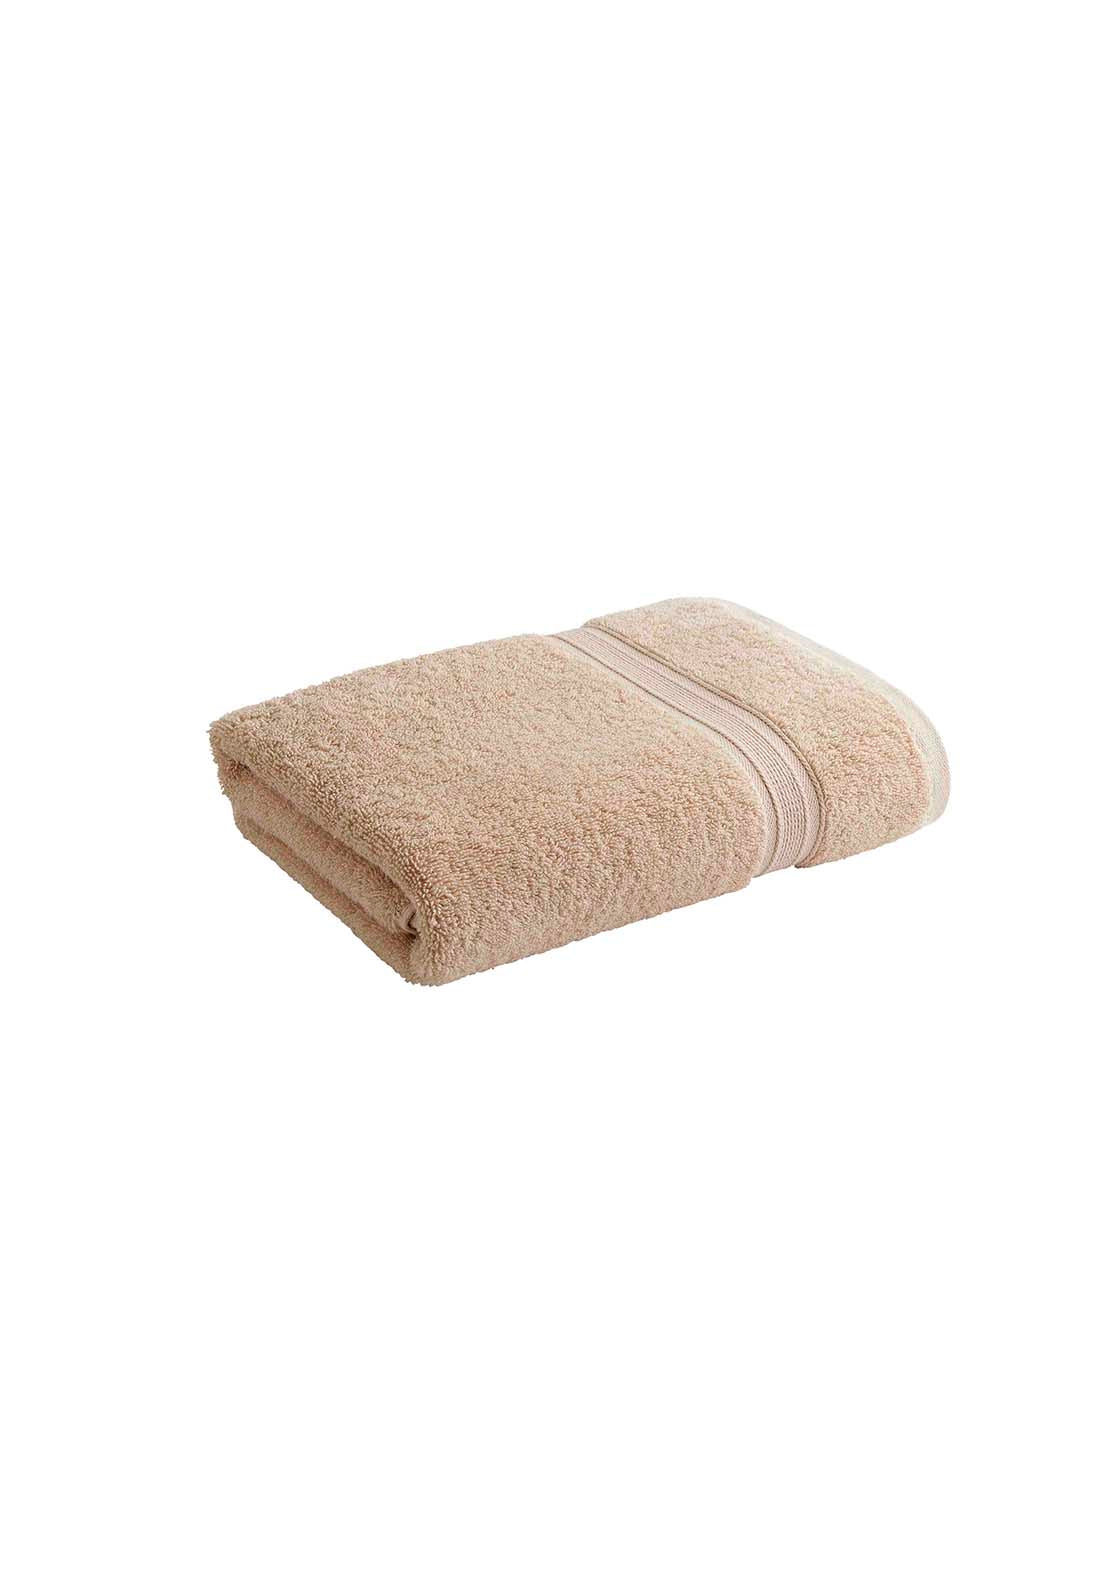 Christy Serene Hand Towel - Driftwood 1 Shaws Department Stores